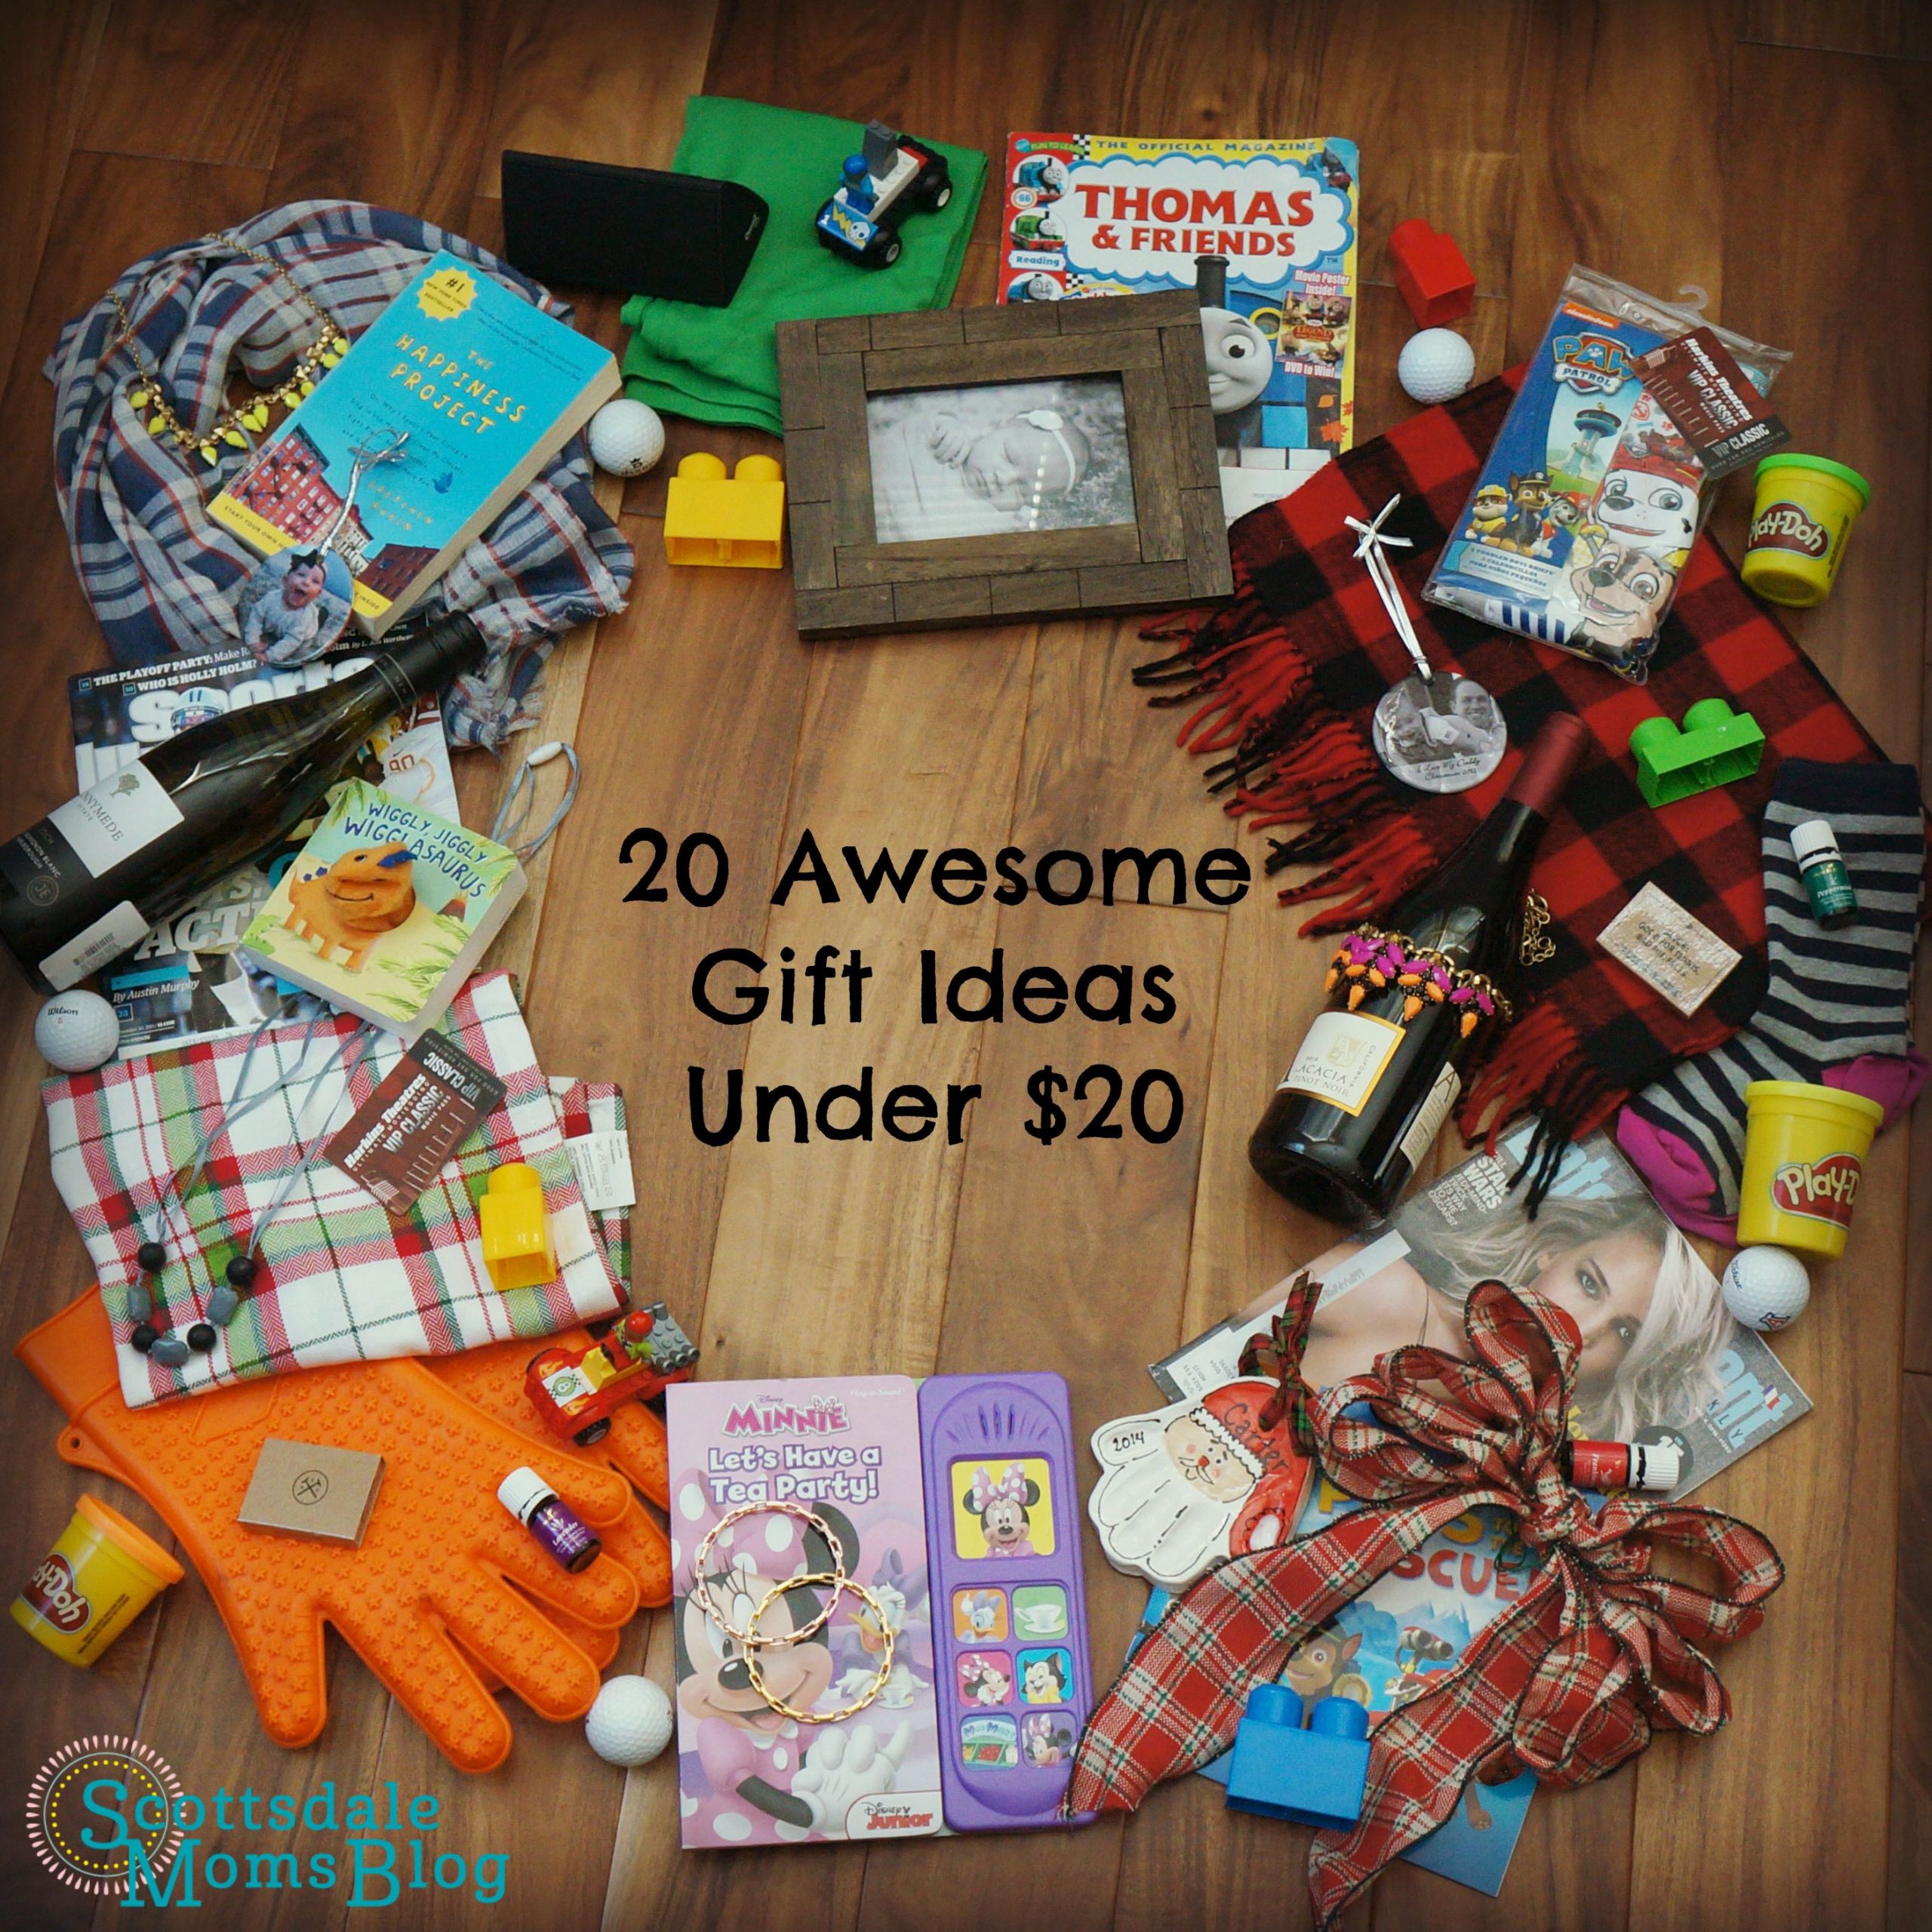 $20 Christmas Gift Ideas
 20 Awesome Gift Ideas Under $20